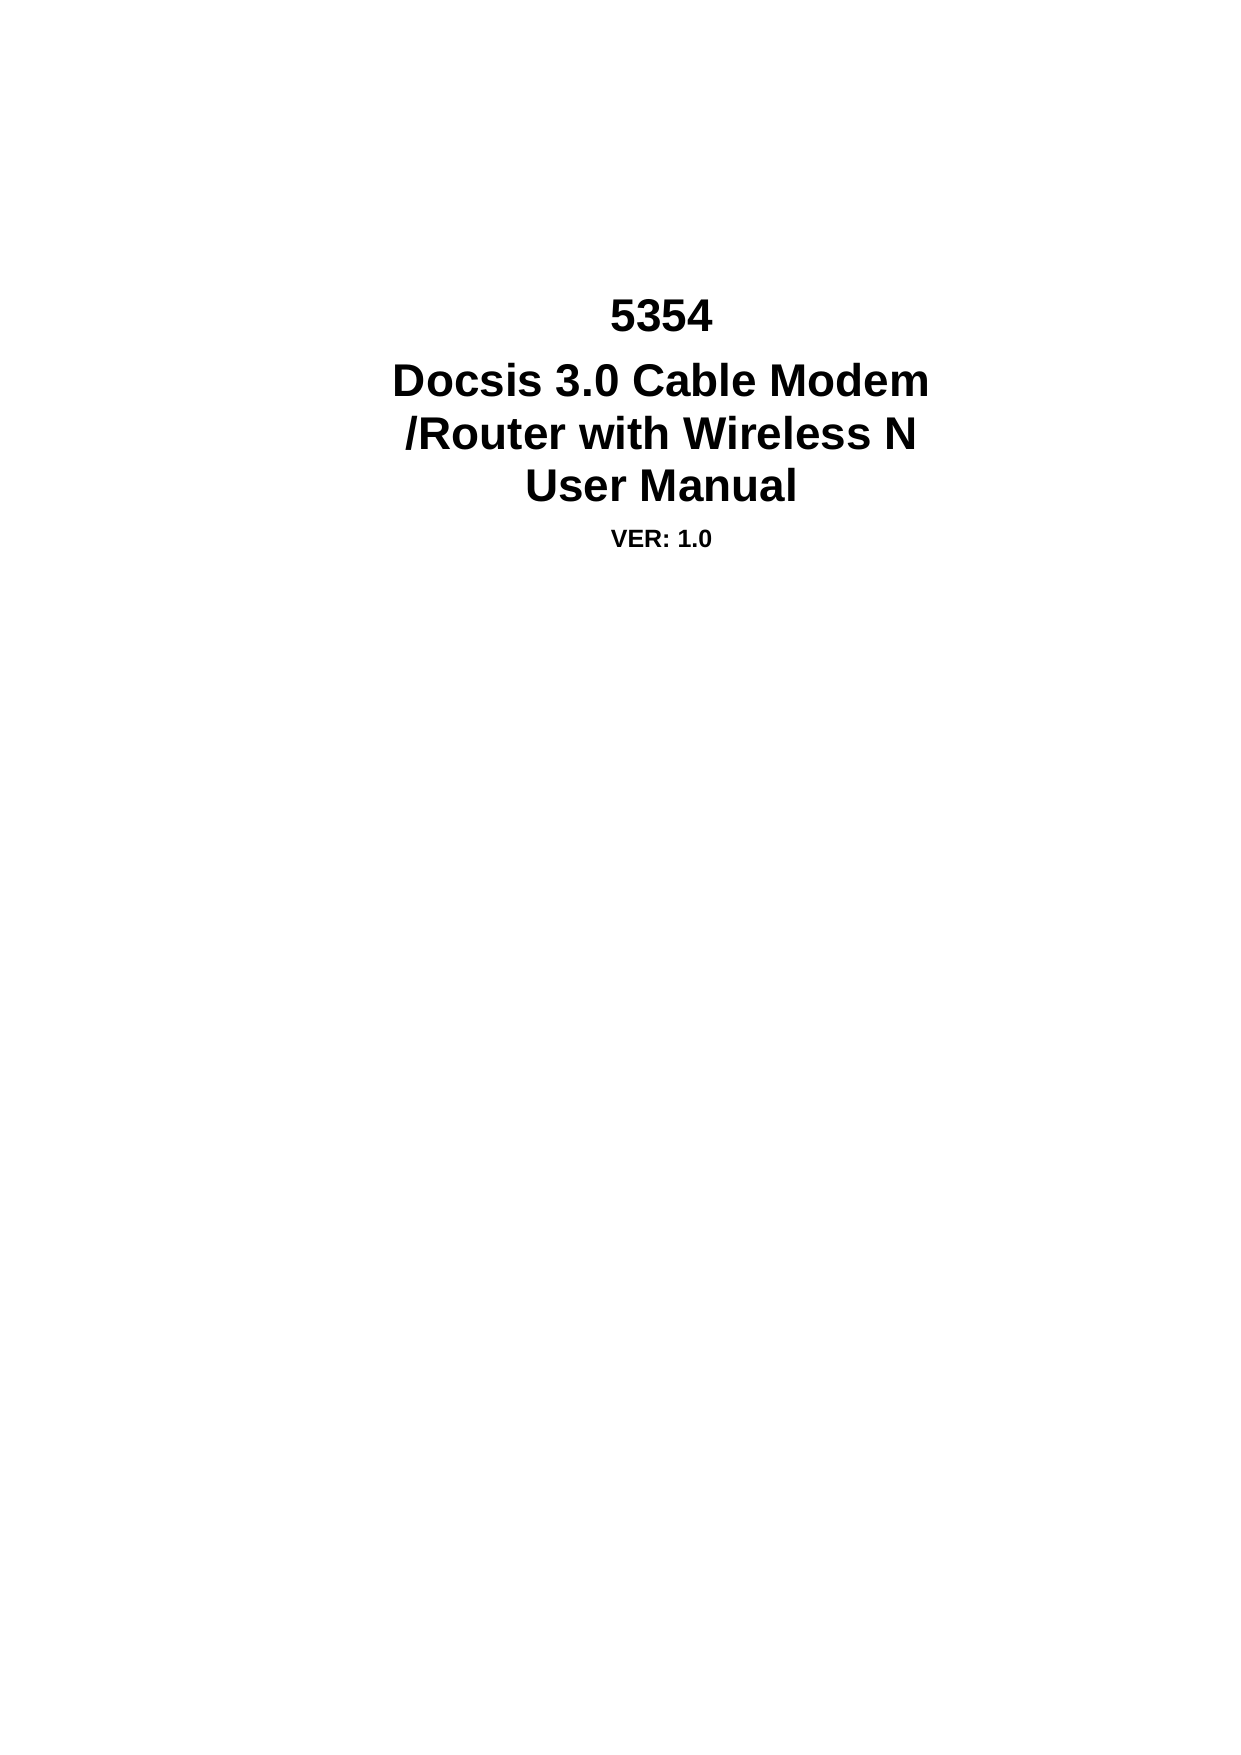     5354 Docsis 3.0 Cable Modem /Router with Wireless N User Manual VER: 1.0   